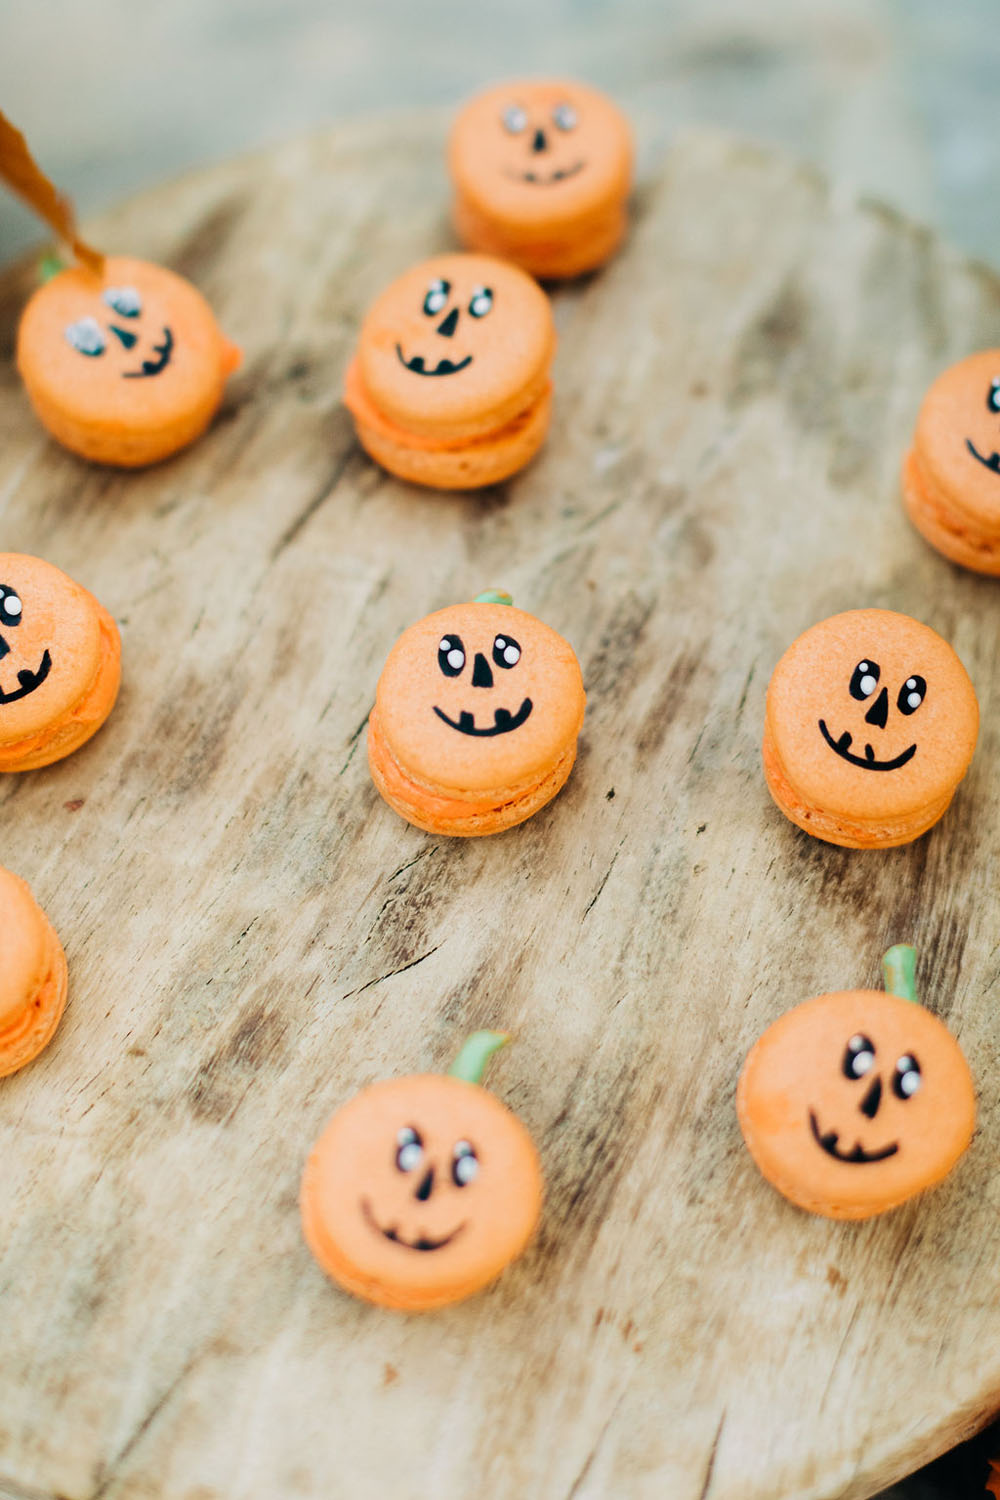 A kids' vintage inspired Halloween party from Beijos Events